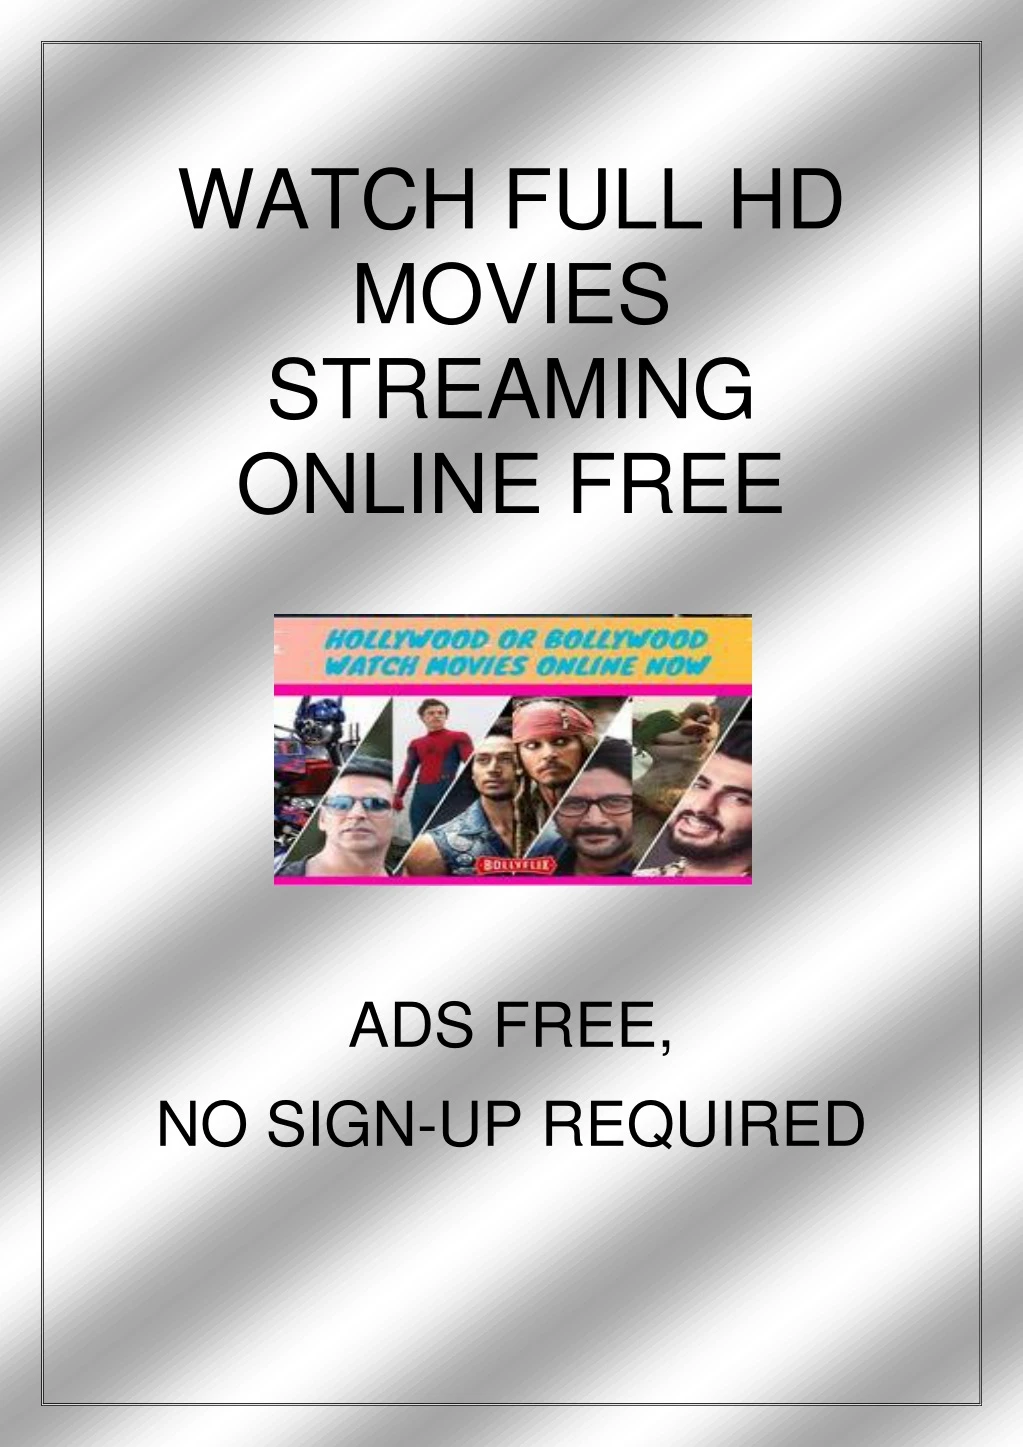 watch full hd movies streaming online free